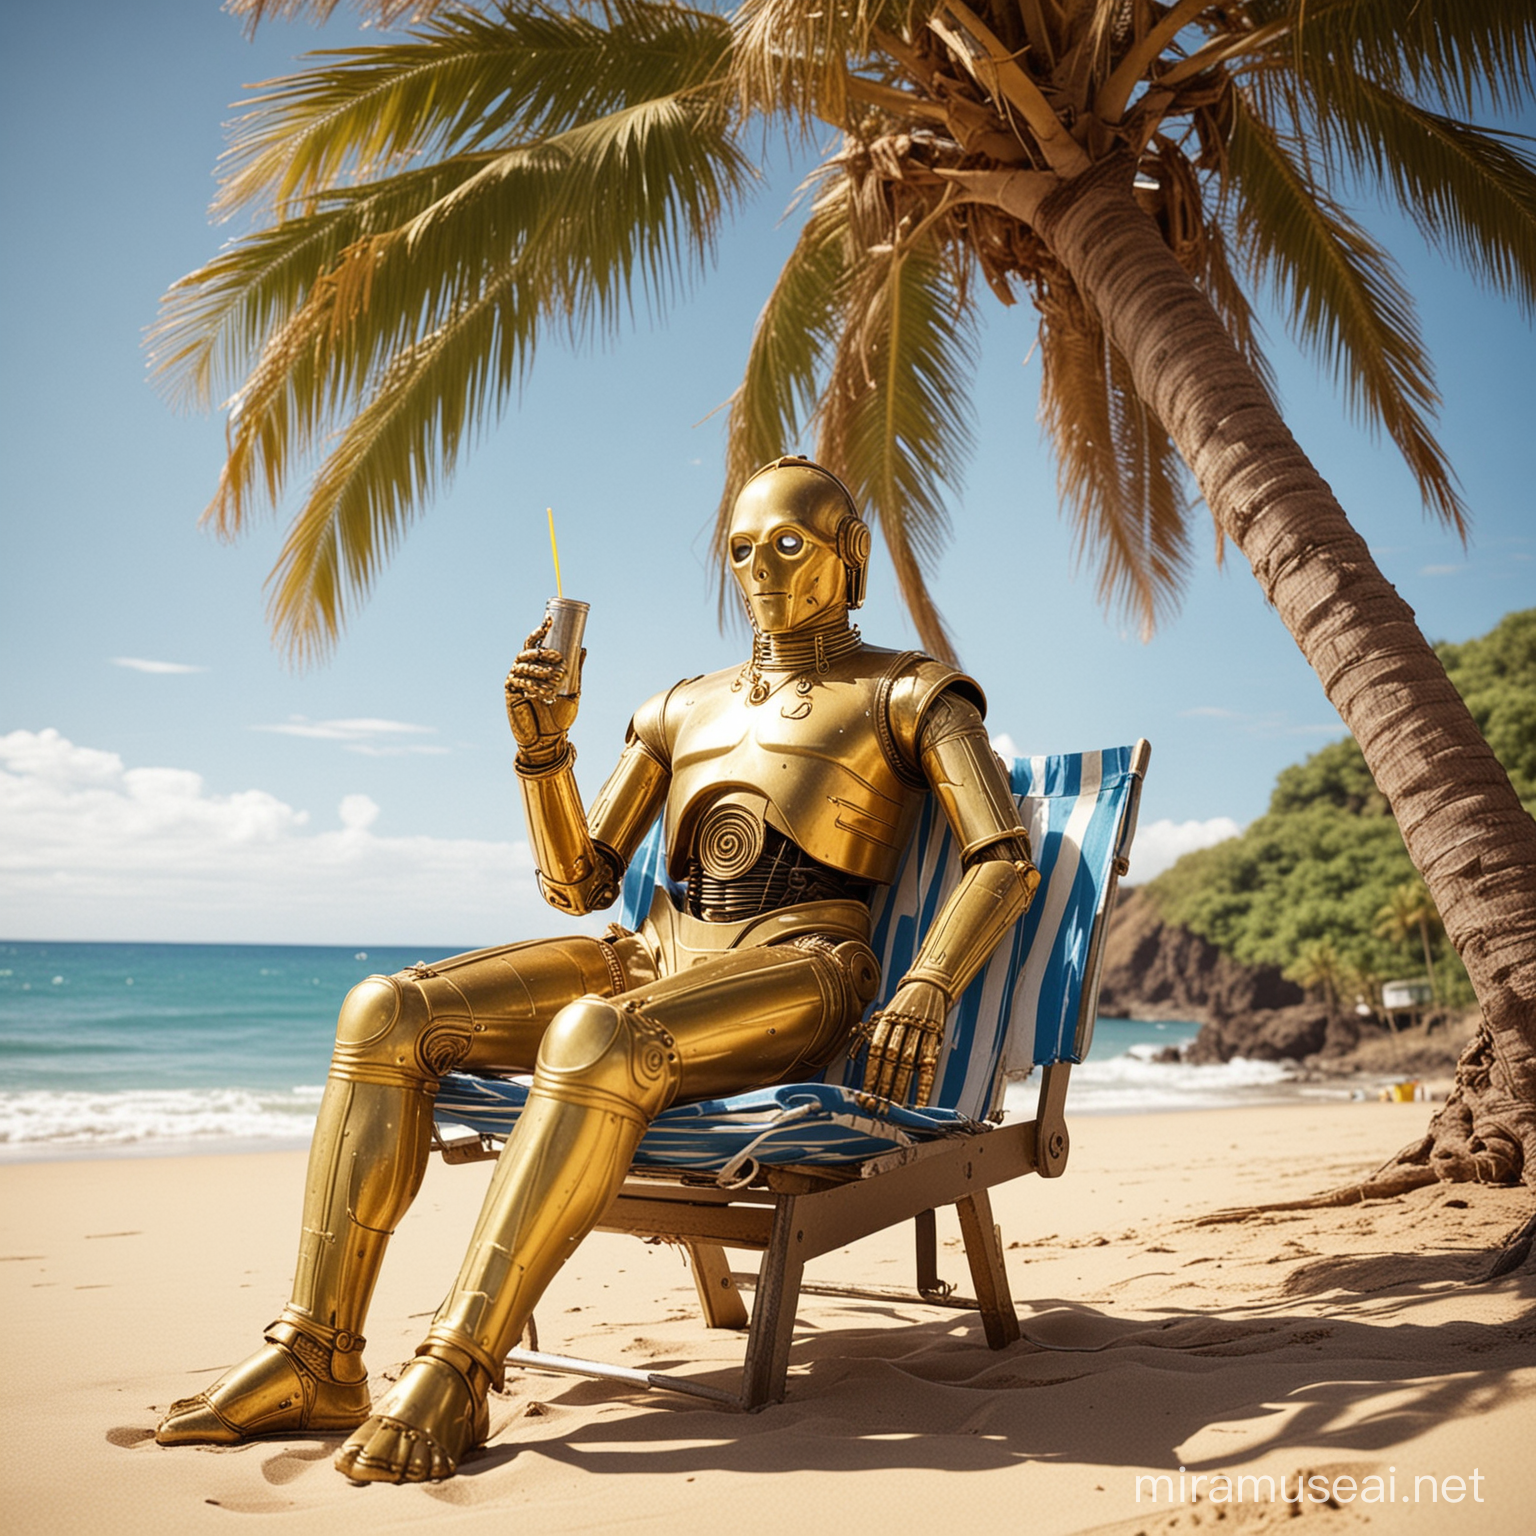 c3p0 on the beach in Hawaii. C3p0 is lying on a sun lounger under a palm tree. Next to it is a small oil can with a drinking straw.  Wide angle, vintage photo 1970 ultra realistic -